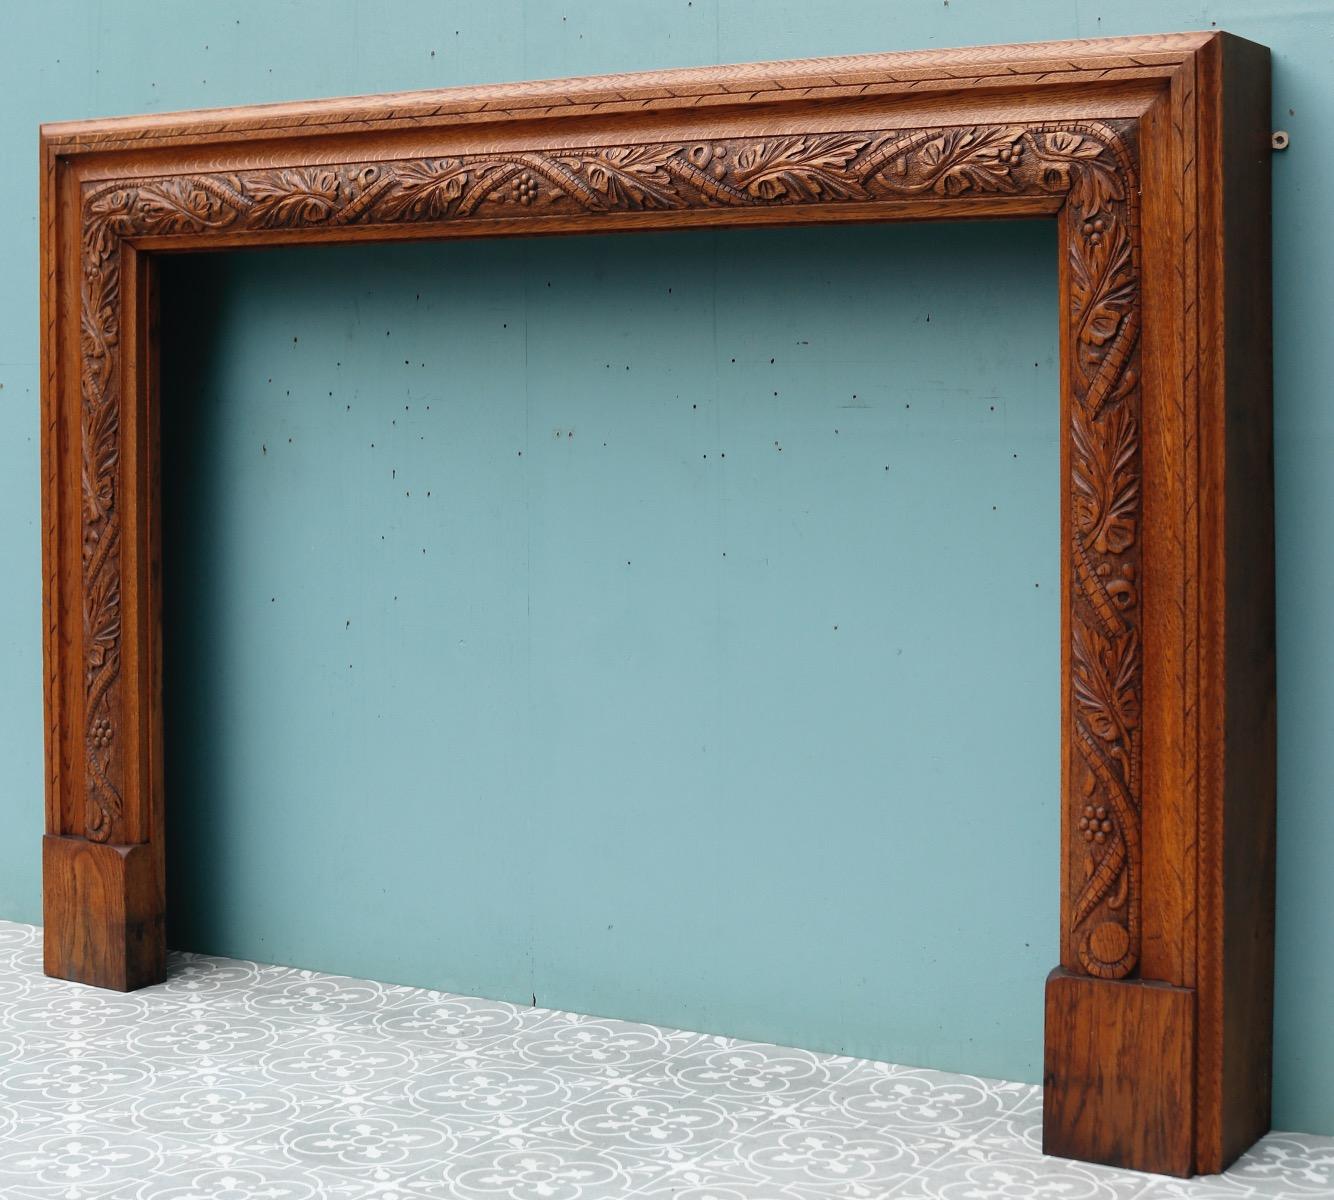 Reclaimed Arts & Crafts Style Bolection Mantel 2